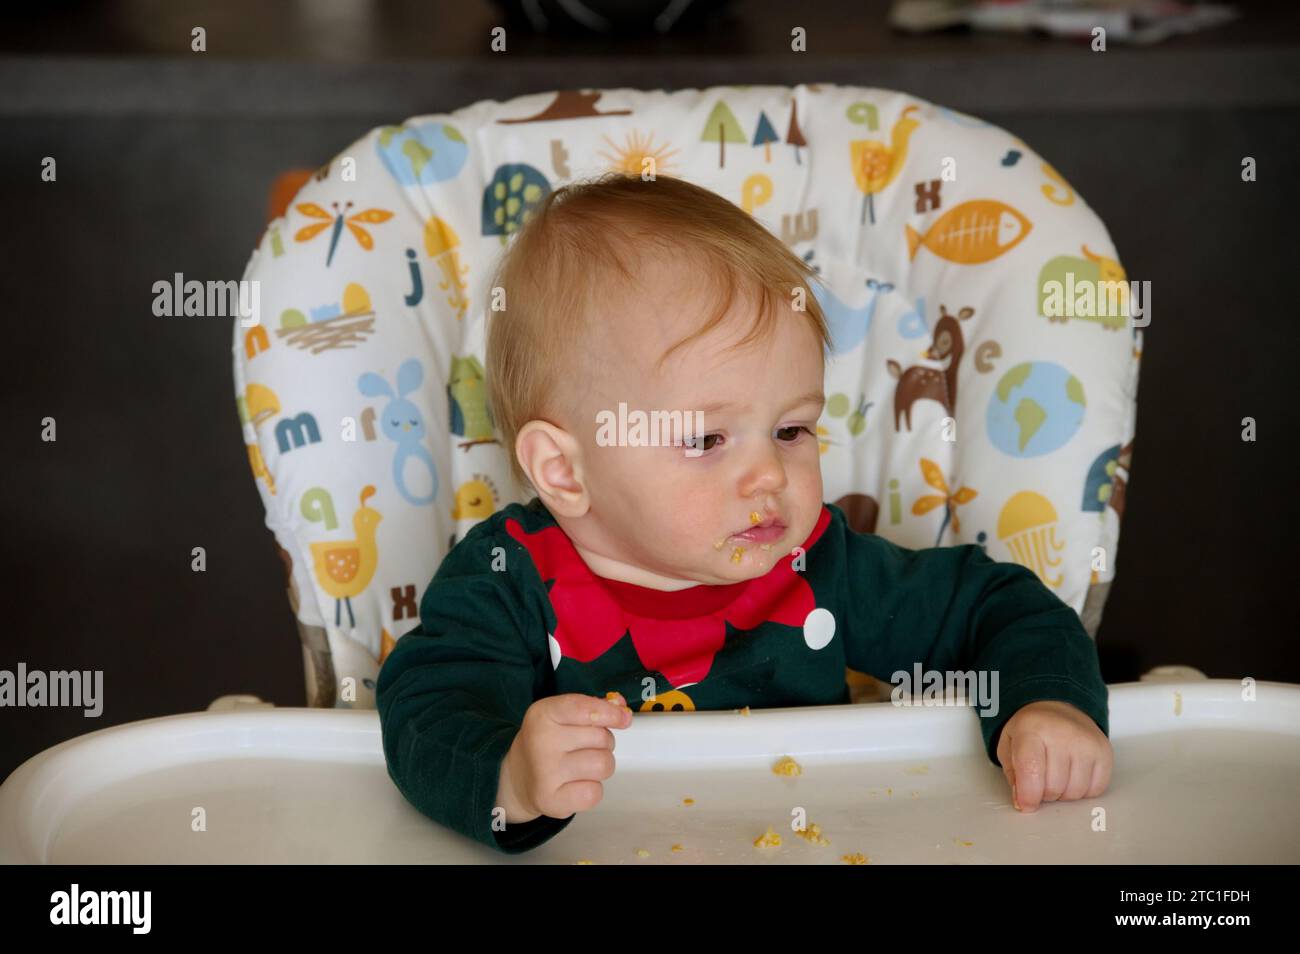 Adorable little baby girl sitting in high chair and eating Stock Photo